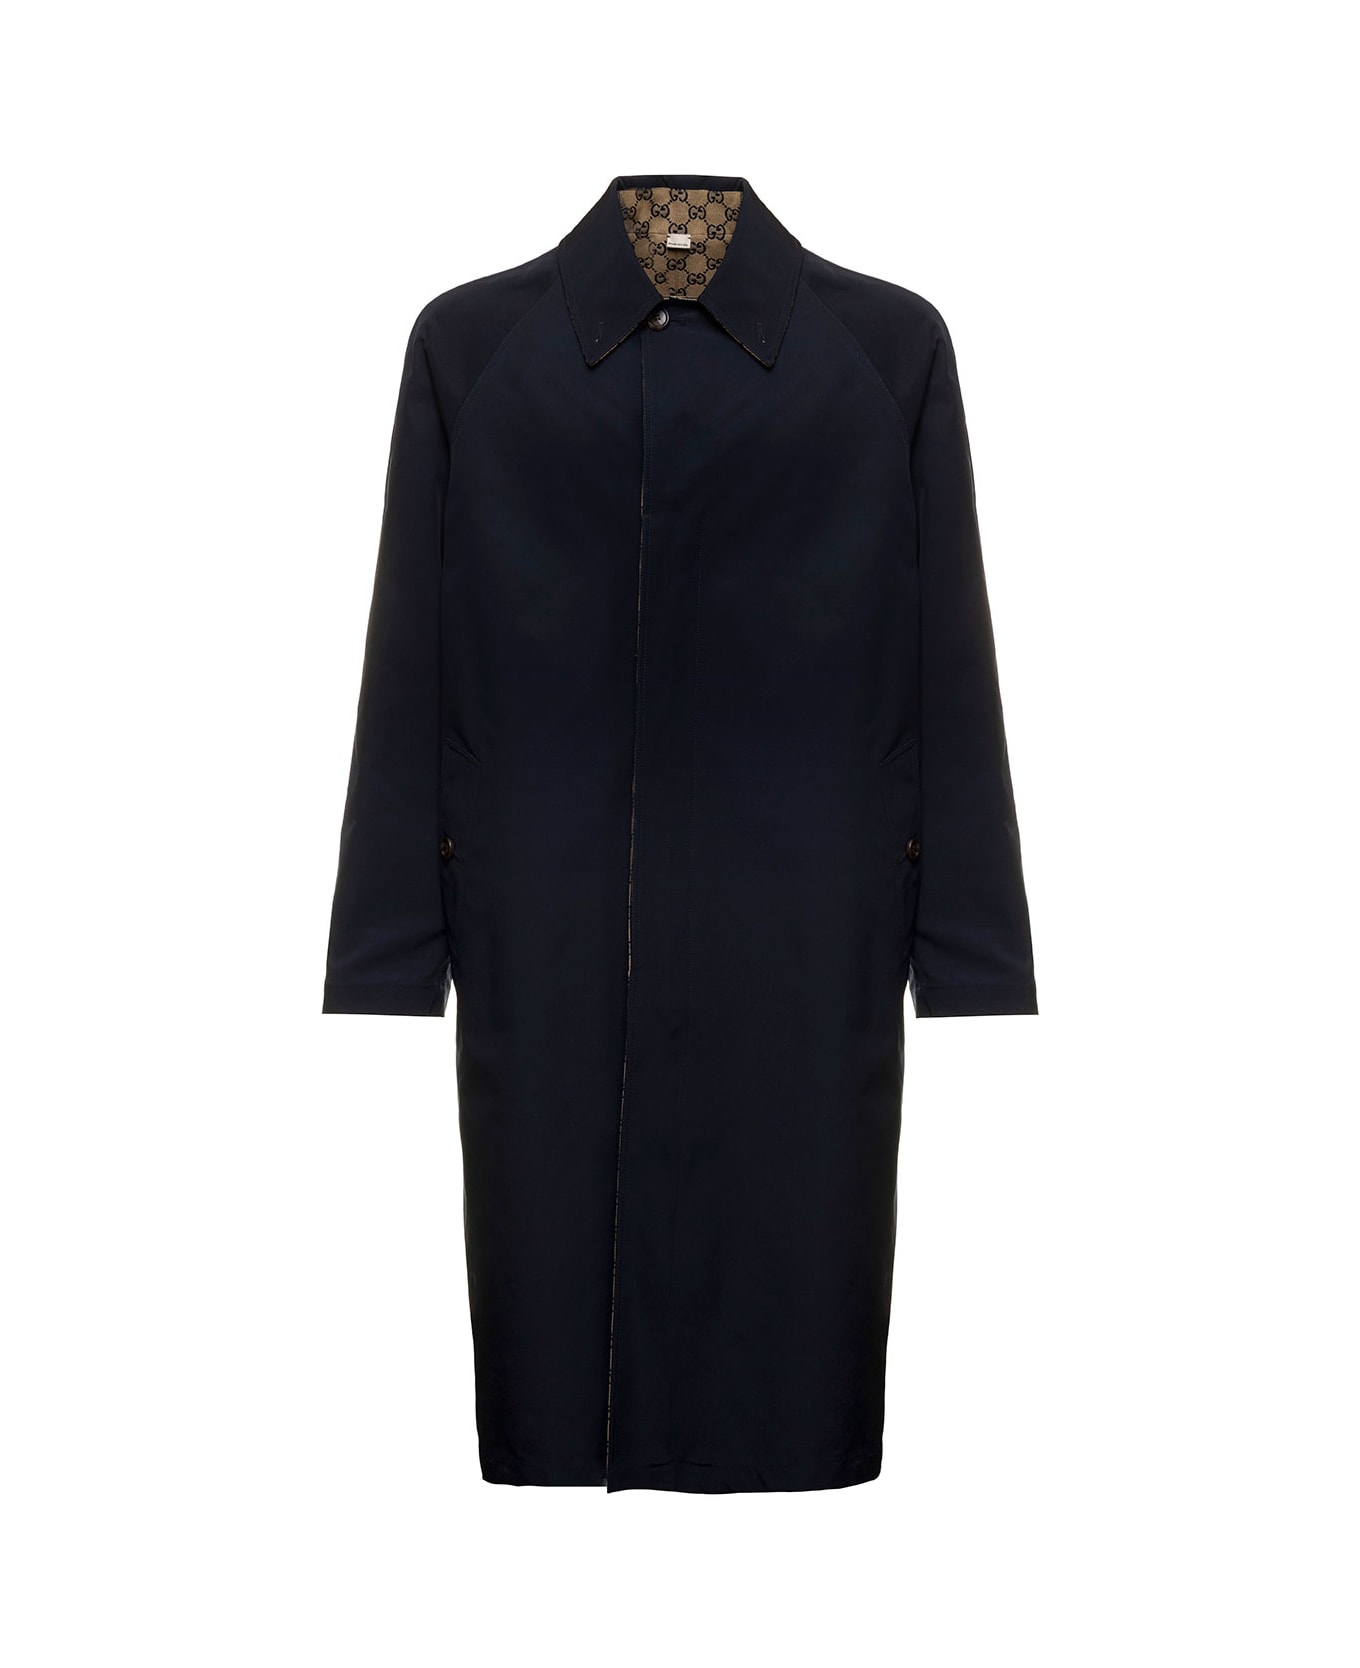 Gucci Blue Reversible Coat In Gg Supreme And Tech Canvas Gucci Man - Blue コート